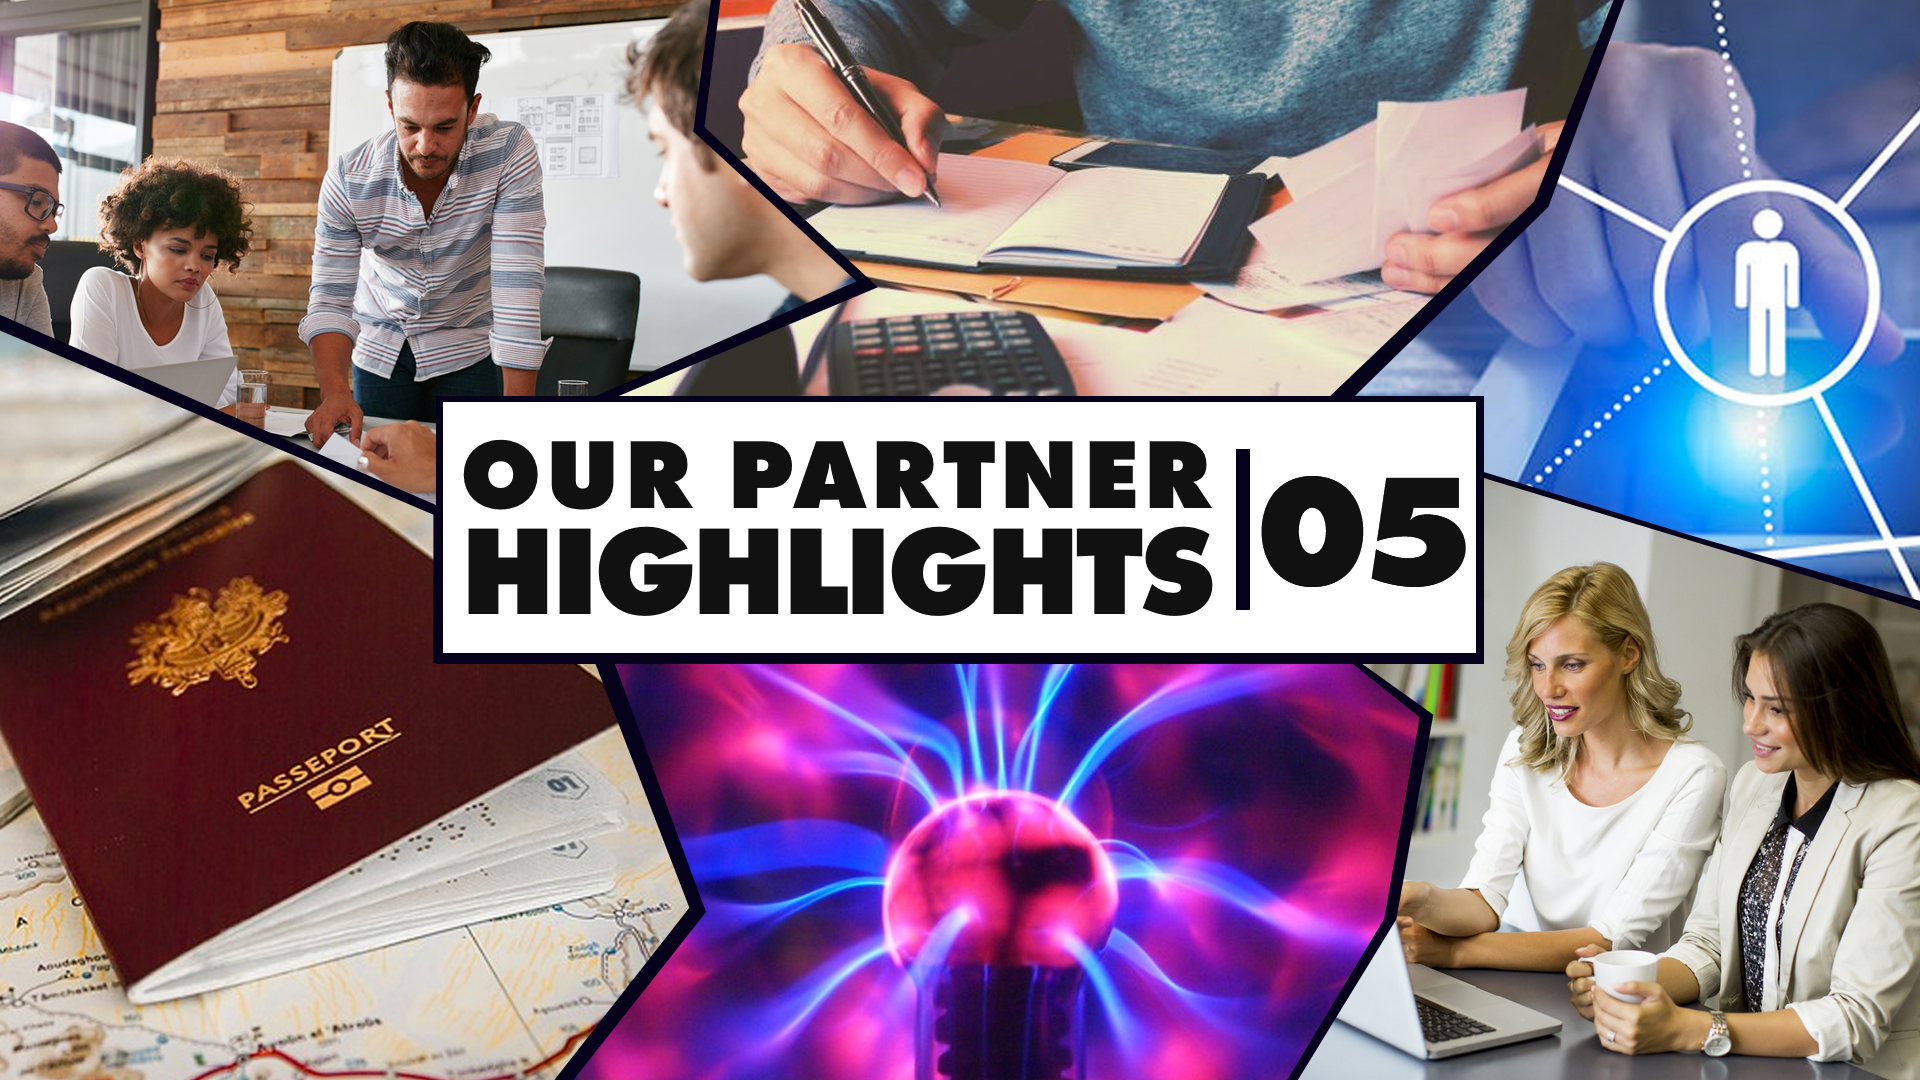 Our Partner Highlights | 05